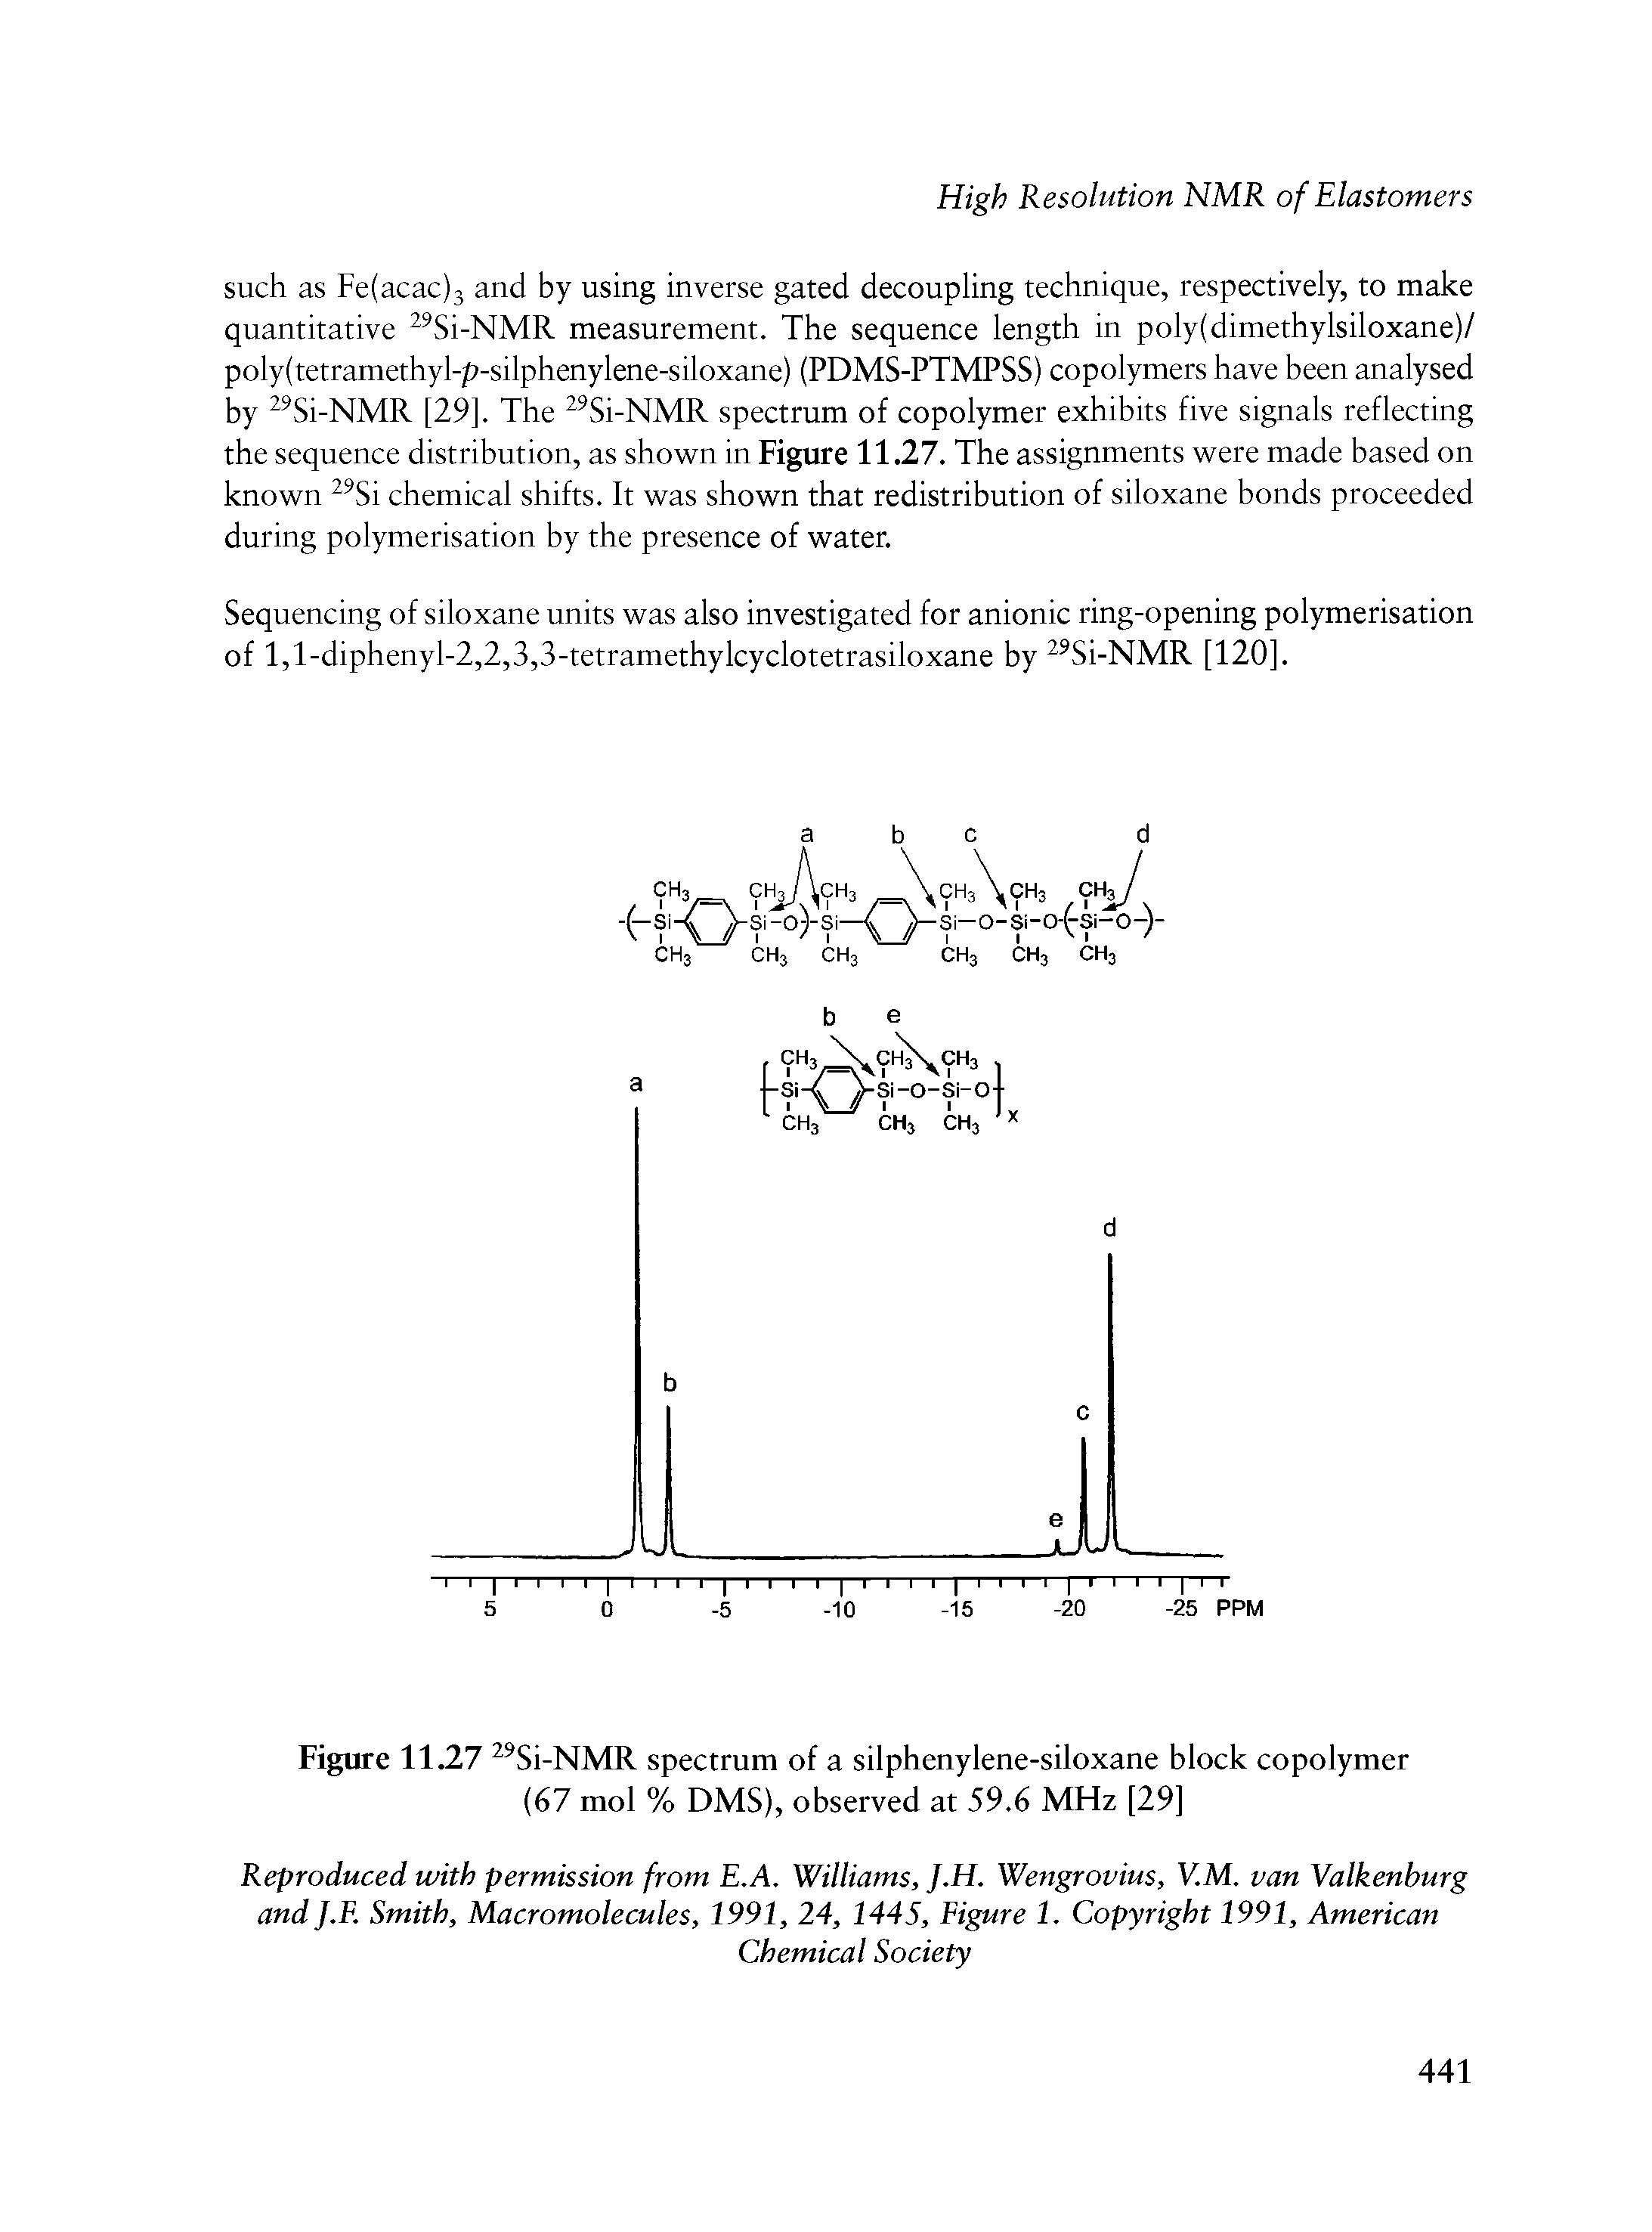 Figure 11.27 29Si-NMR spectrum of a silphenylene-siloxane block copolymer (67 mol % DMS), observed at 59.6 MHz [29]...